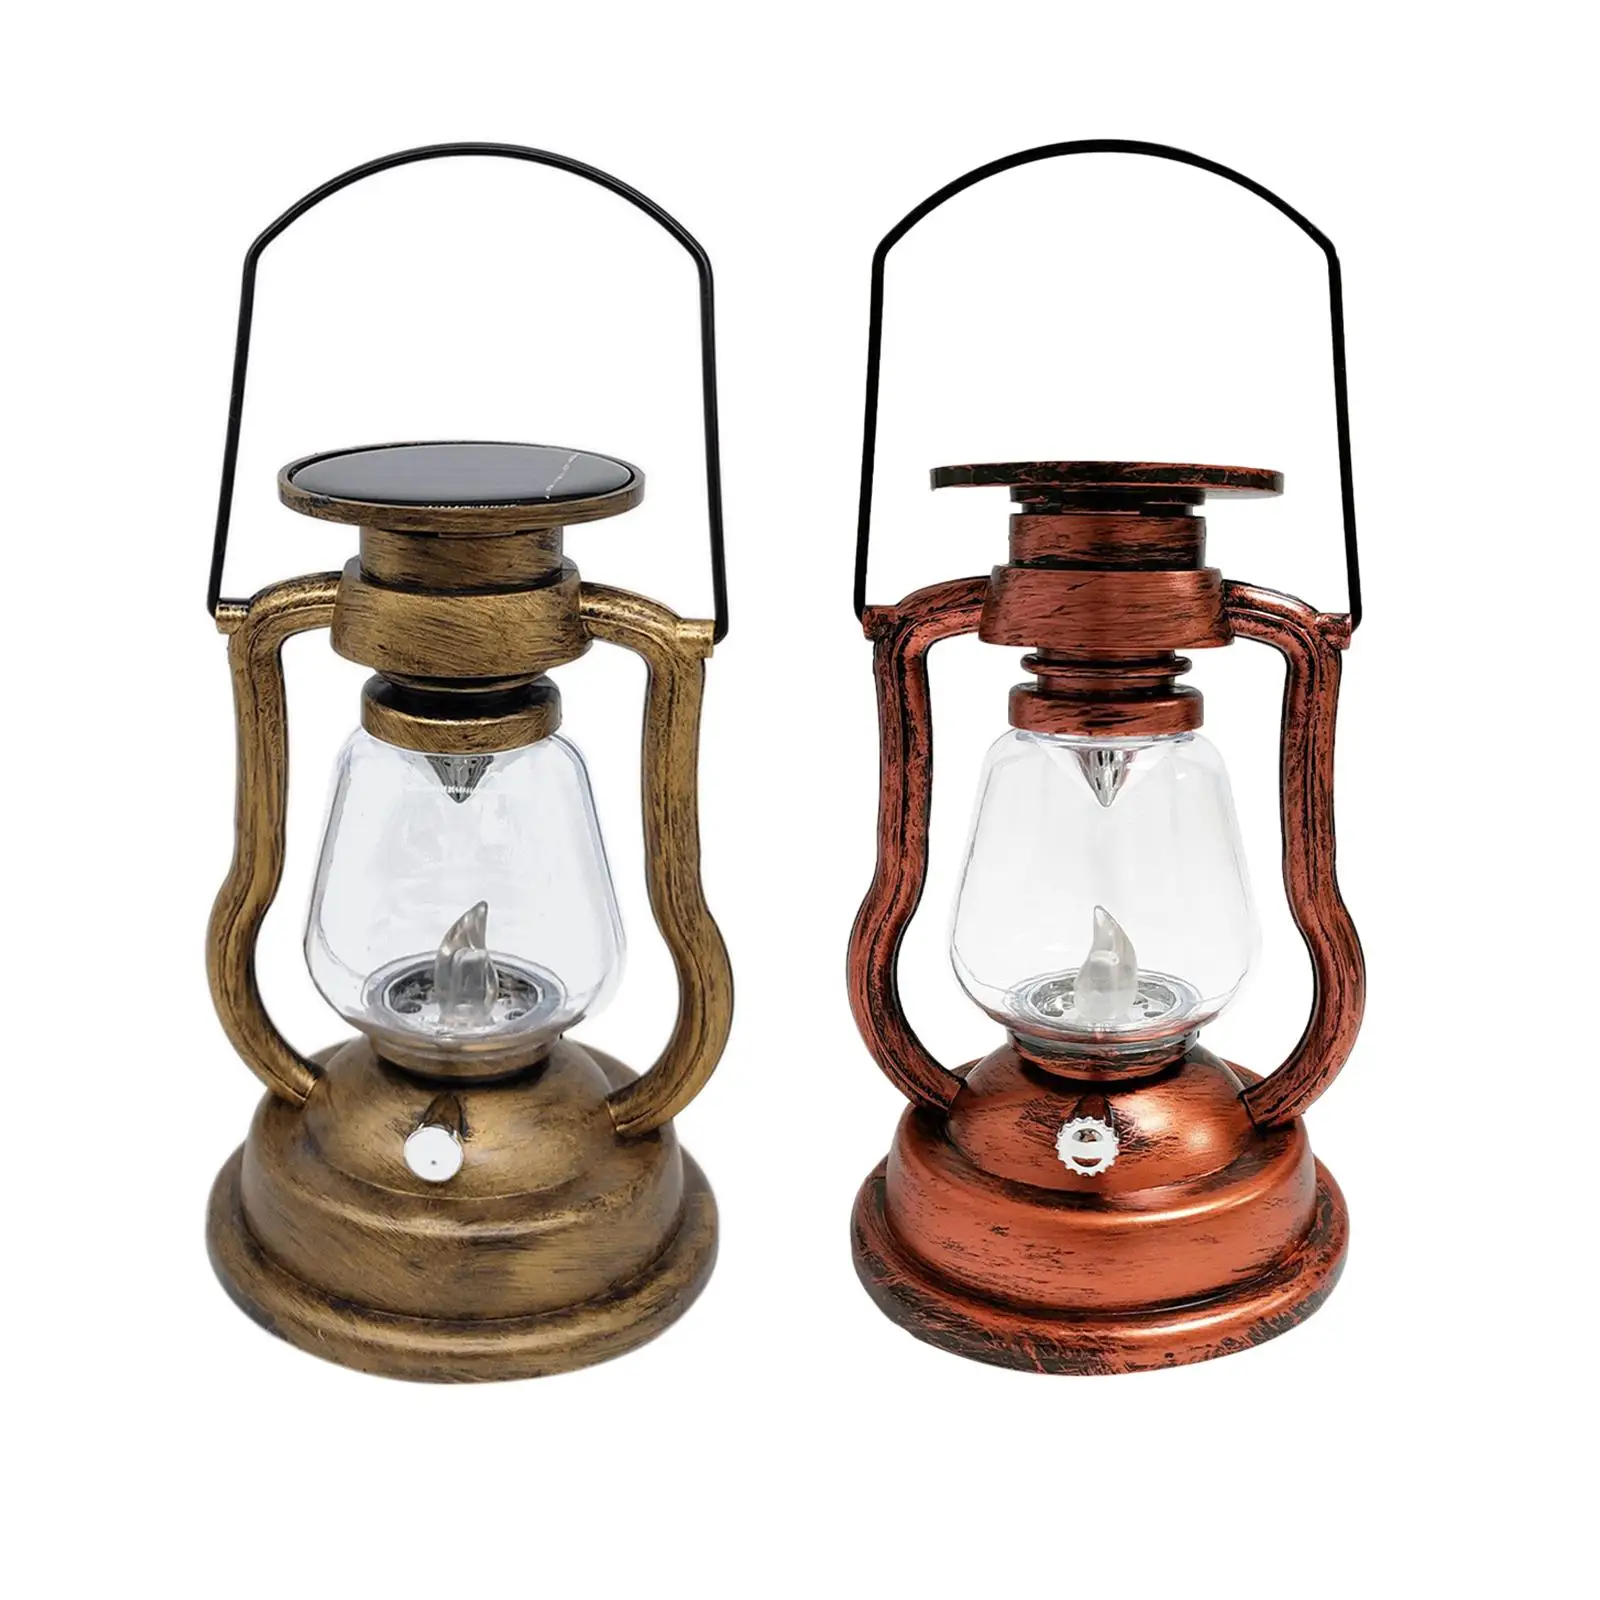 LED Camping Lanterns Solar Waterproof Night Light Handheld or Hanging Outdoors Retro Style Camping Lamp for Fence Pathway Decor